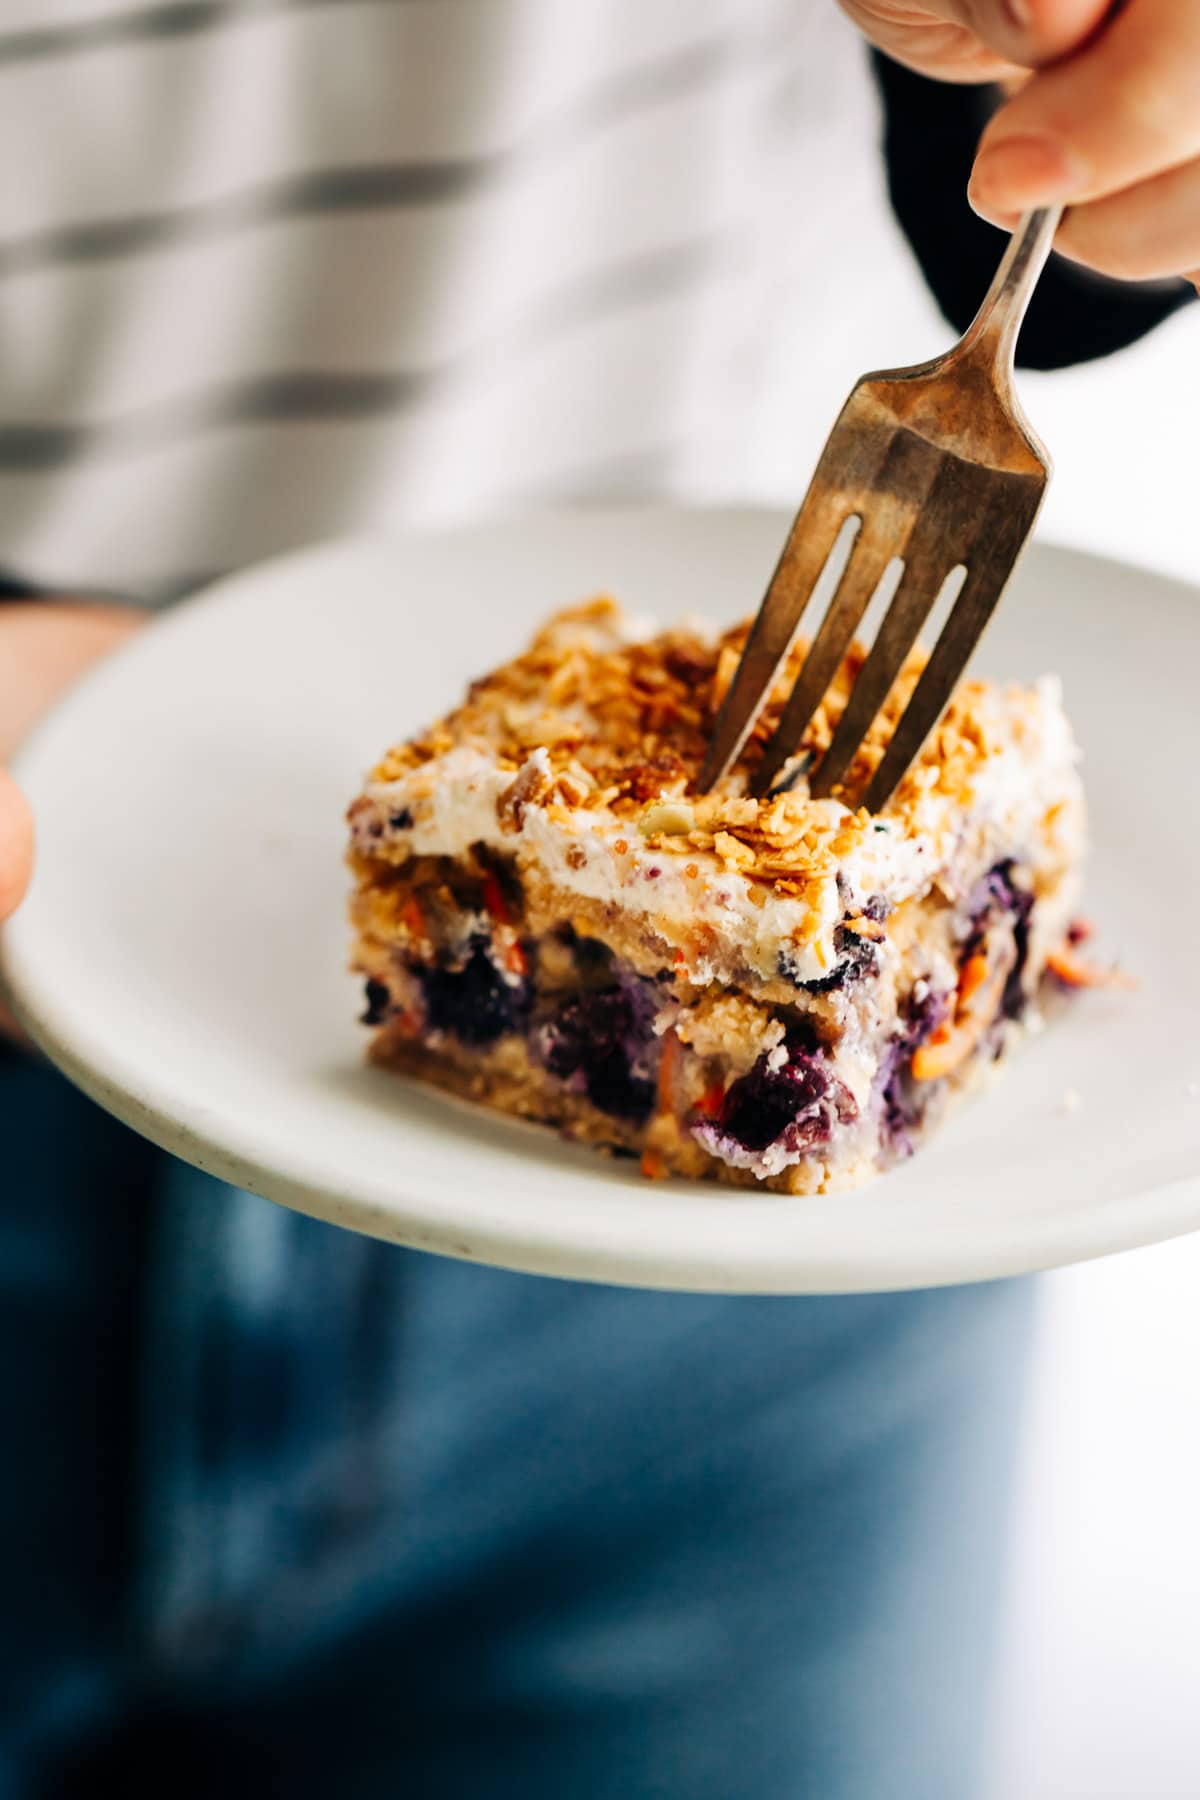 Blueberry carrot cake bar on plate with frosting and granola sprinkled on top.